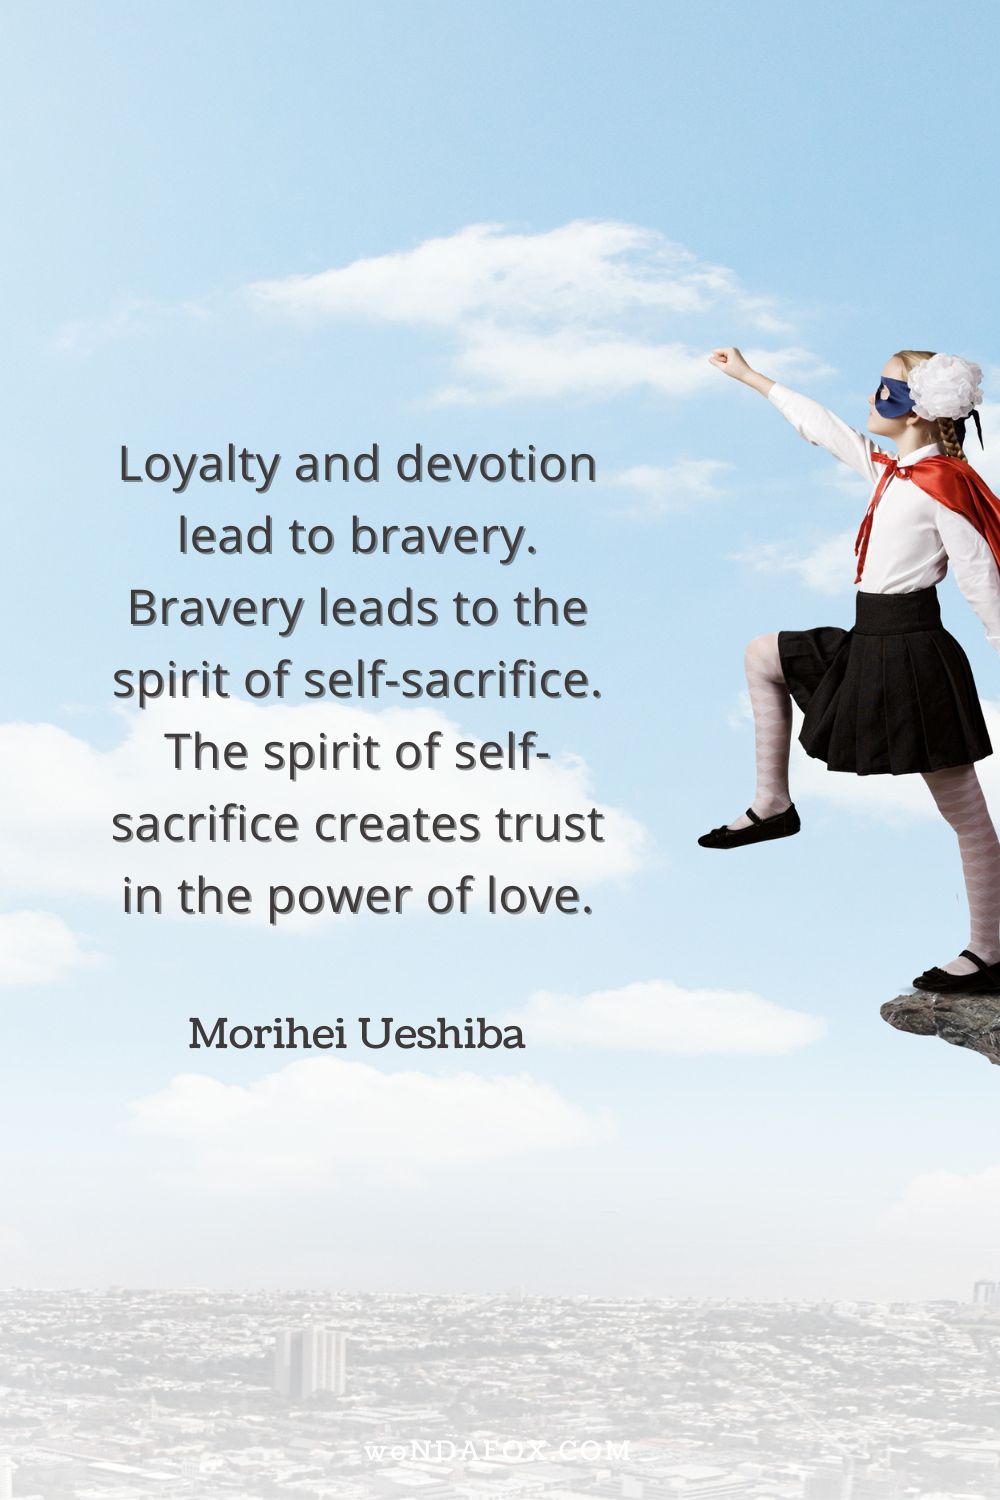 Loyalty and devotion lead to bravery. Bravery leads to the spirit of self-sacrifice. The spirit of self-sacrifice creates trust in the power of love.” 